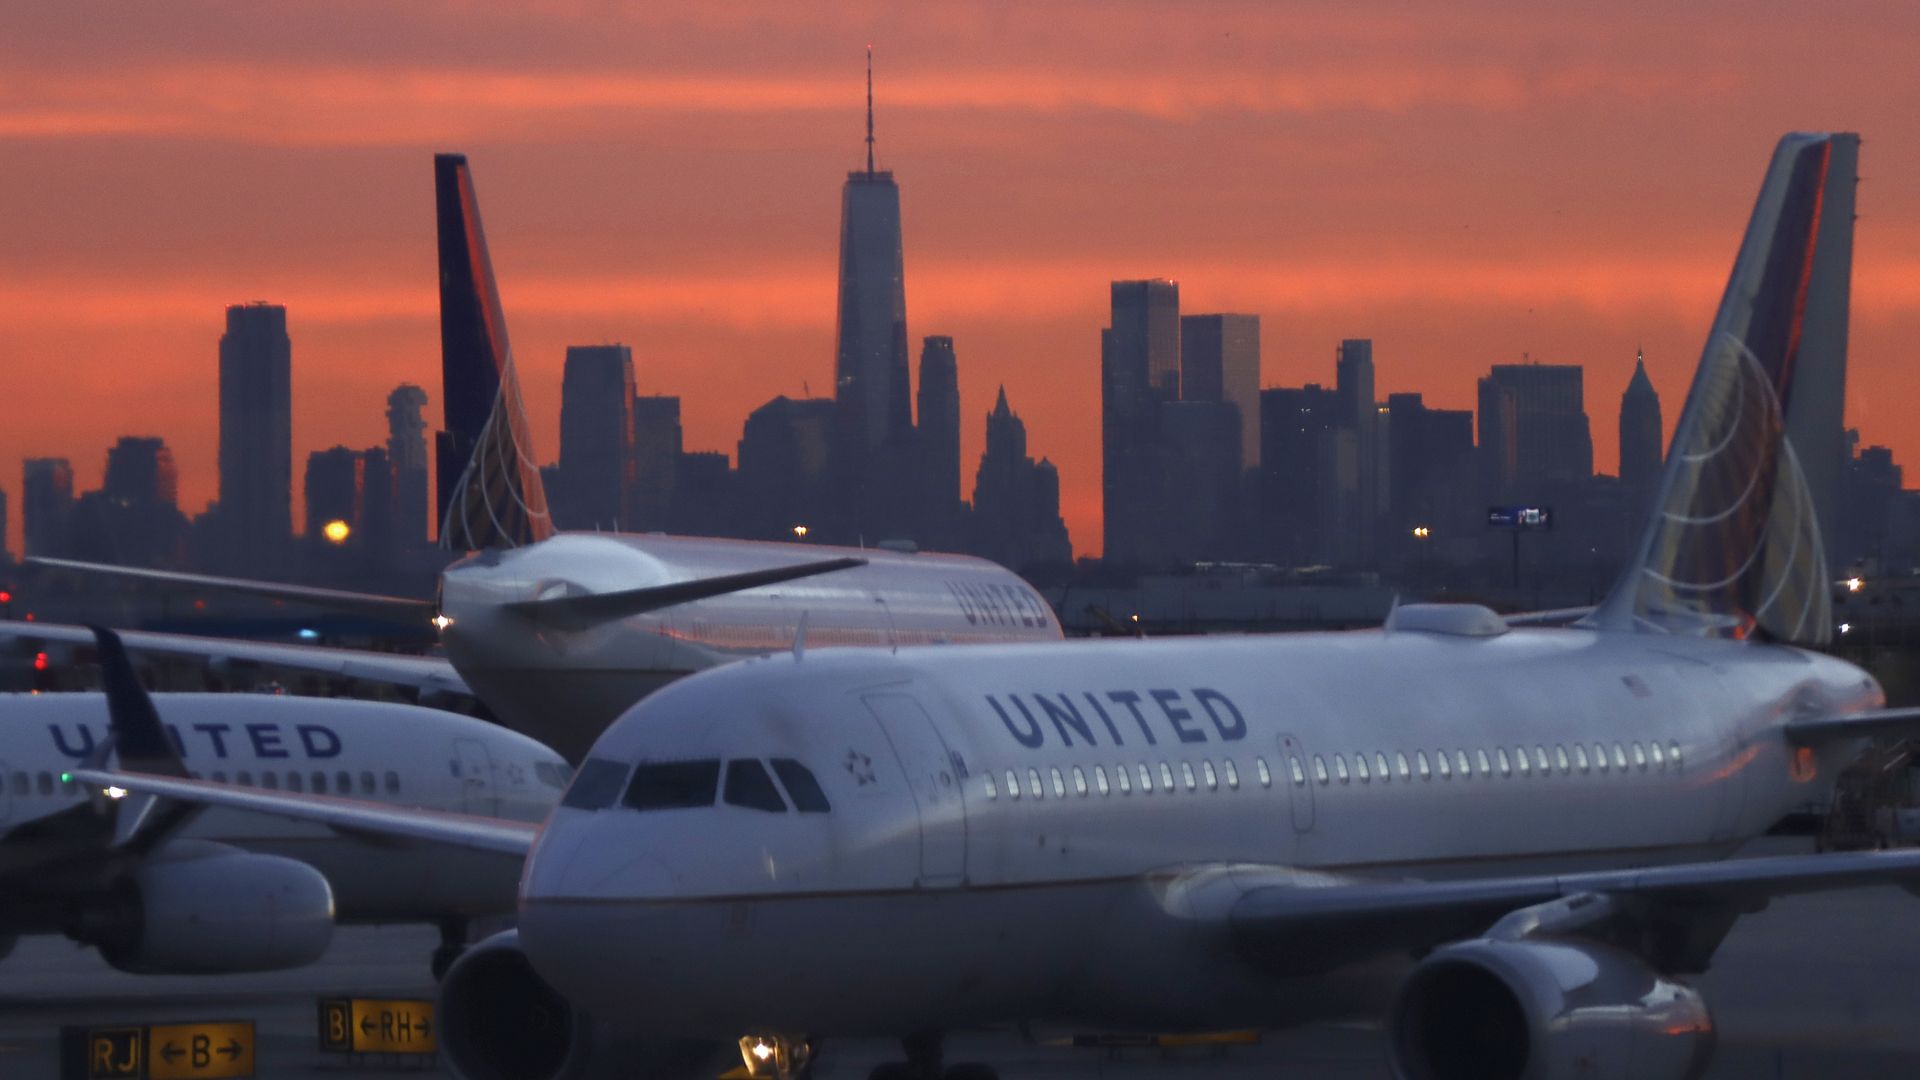  A United Airlines airplane at Newark Liberty International Airport as the sun rises behind the skyline of lower Manhattan and One World Trade Center in New York City on December 13, 2021